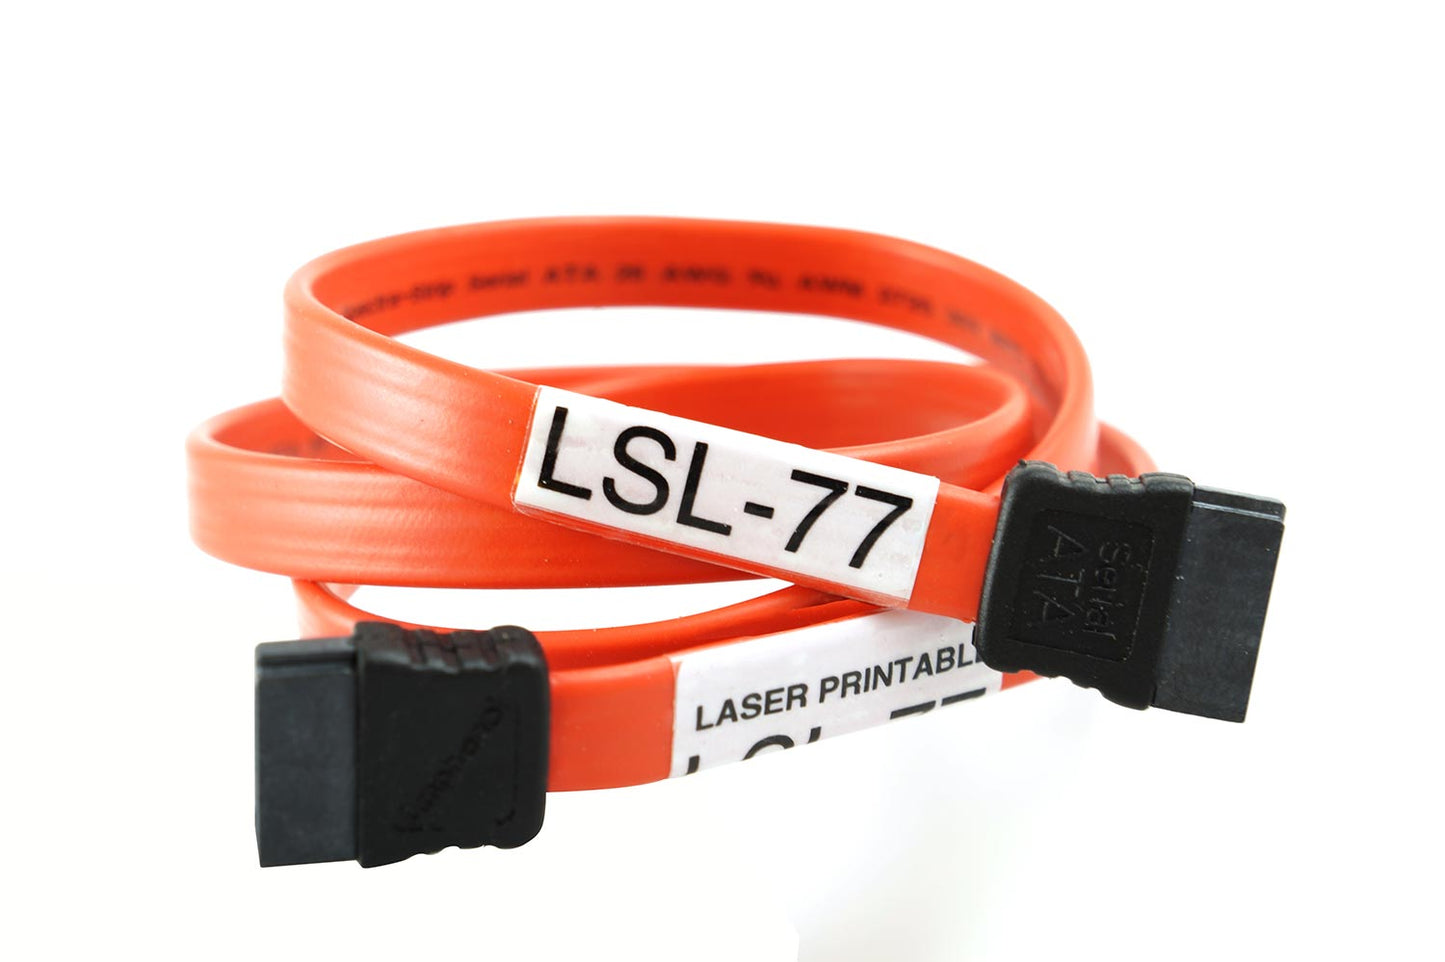 LSL-77 wire & cable markers